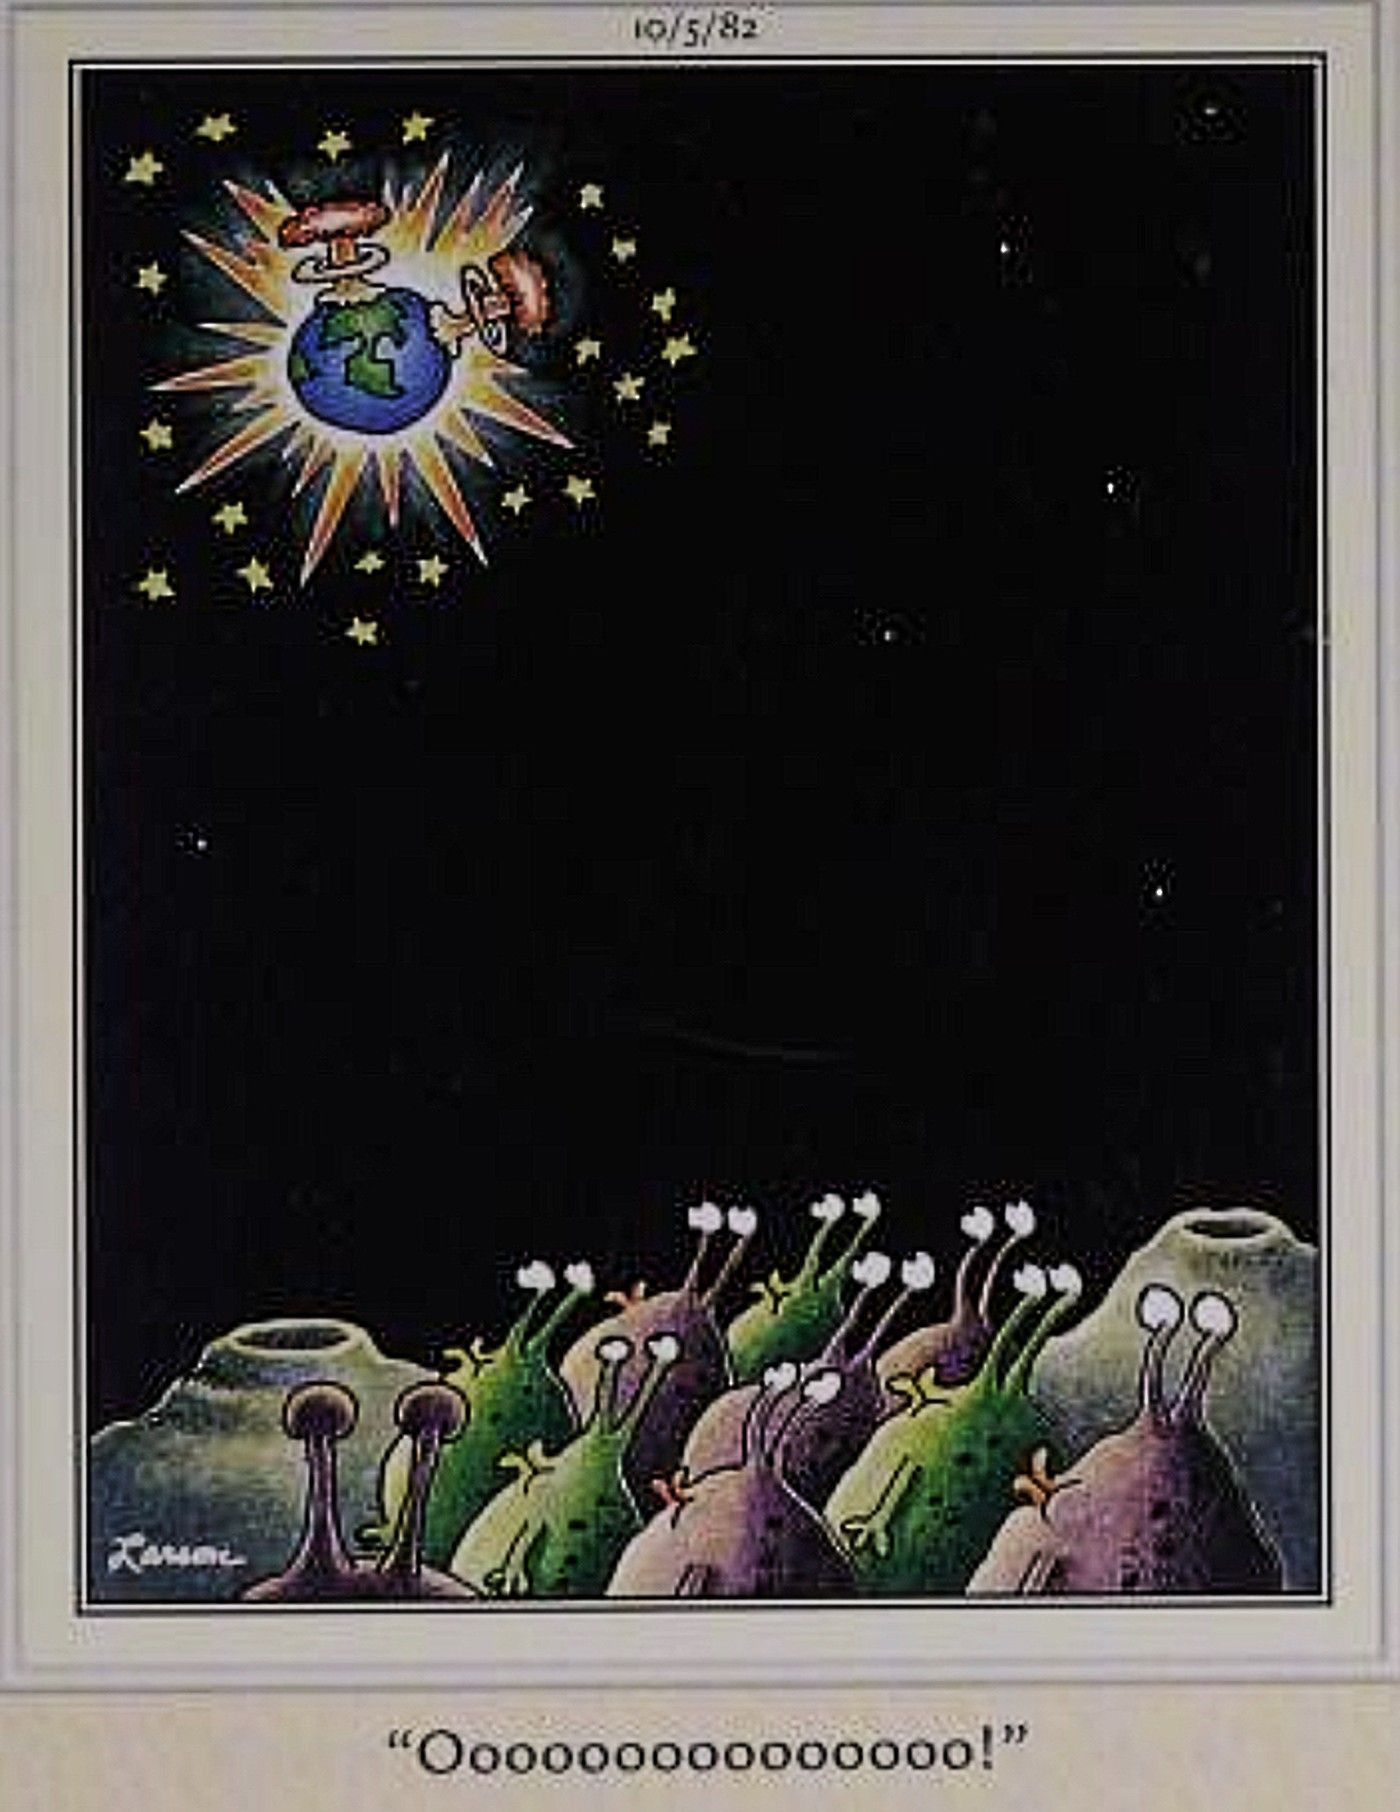 Far Side, aliens watching in awe as the Earth explodes